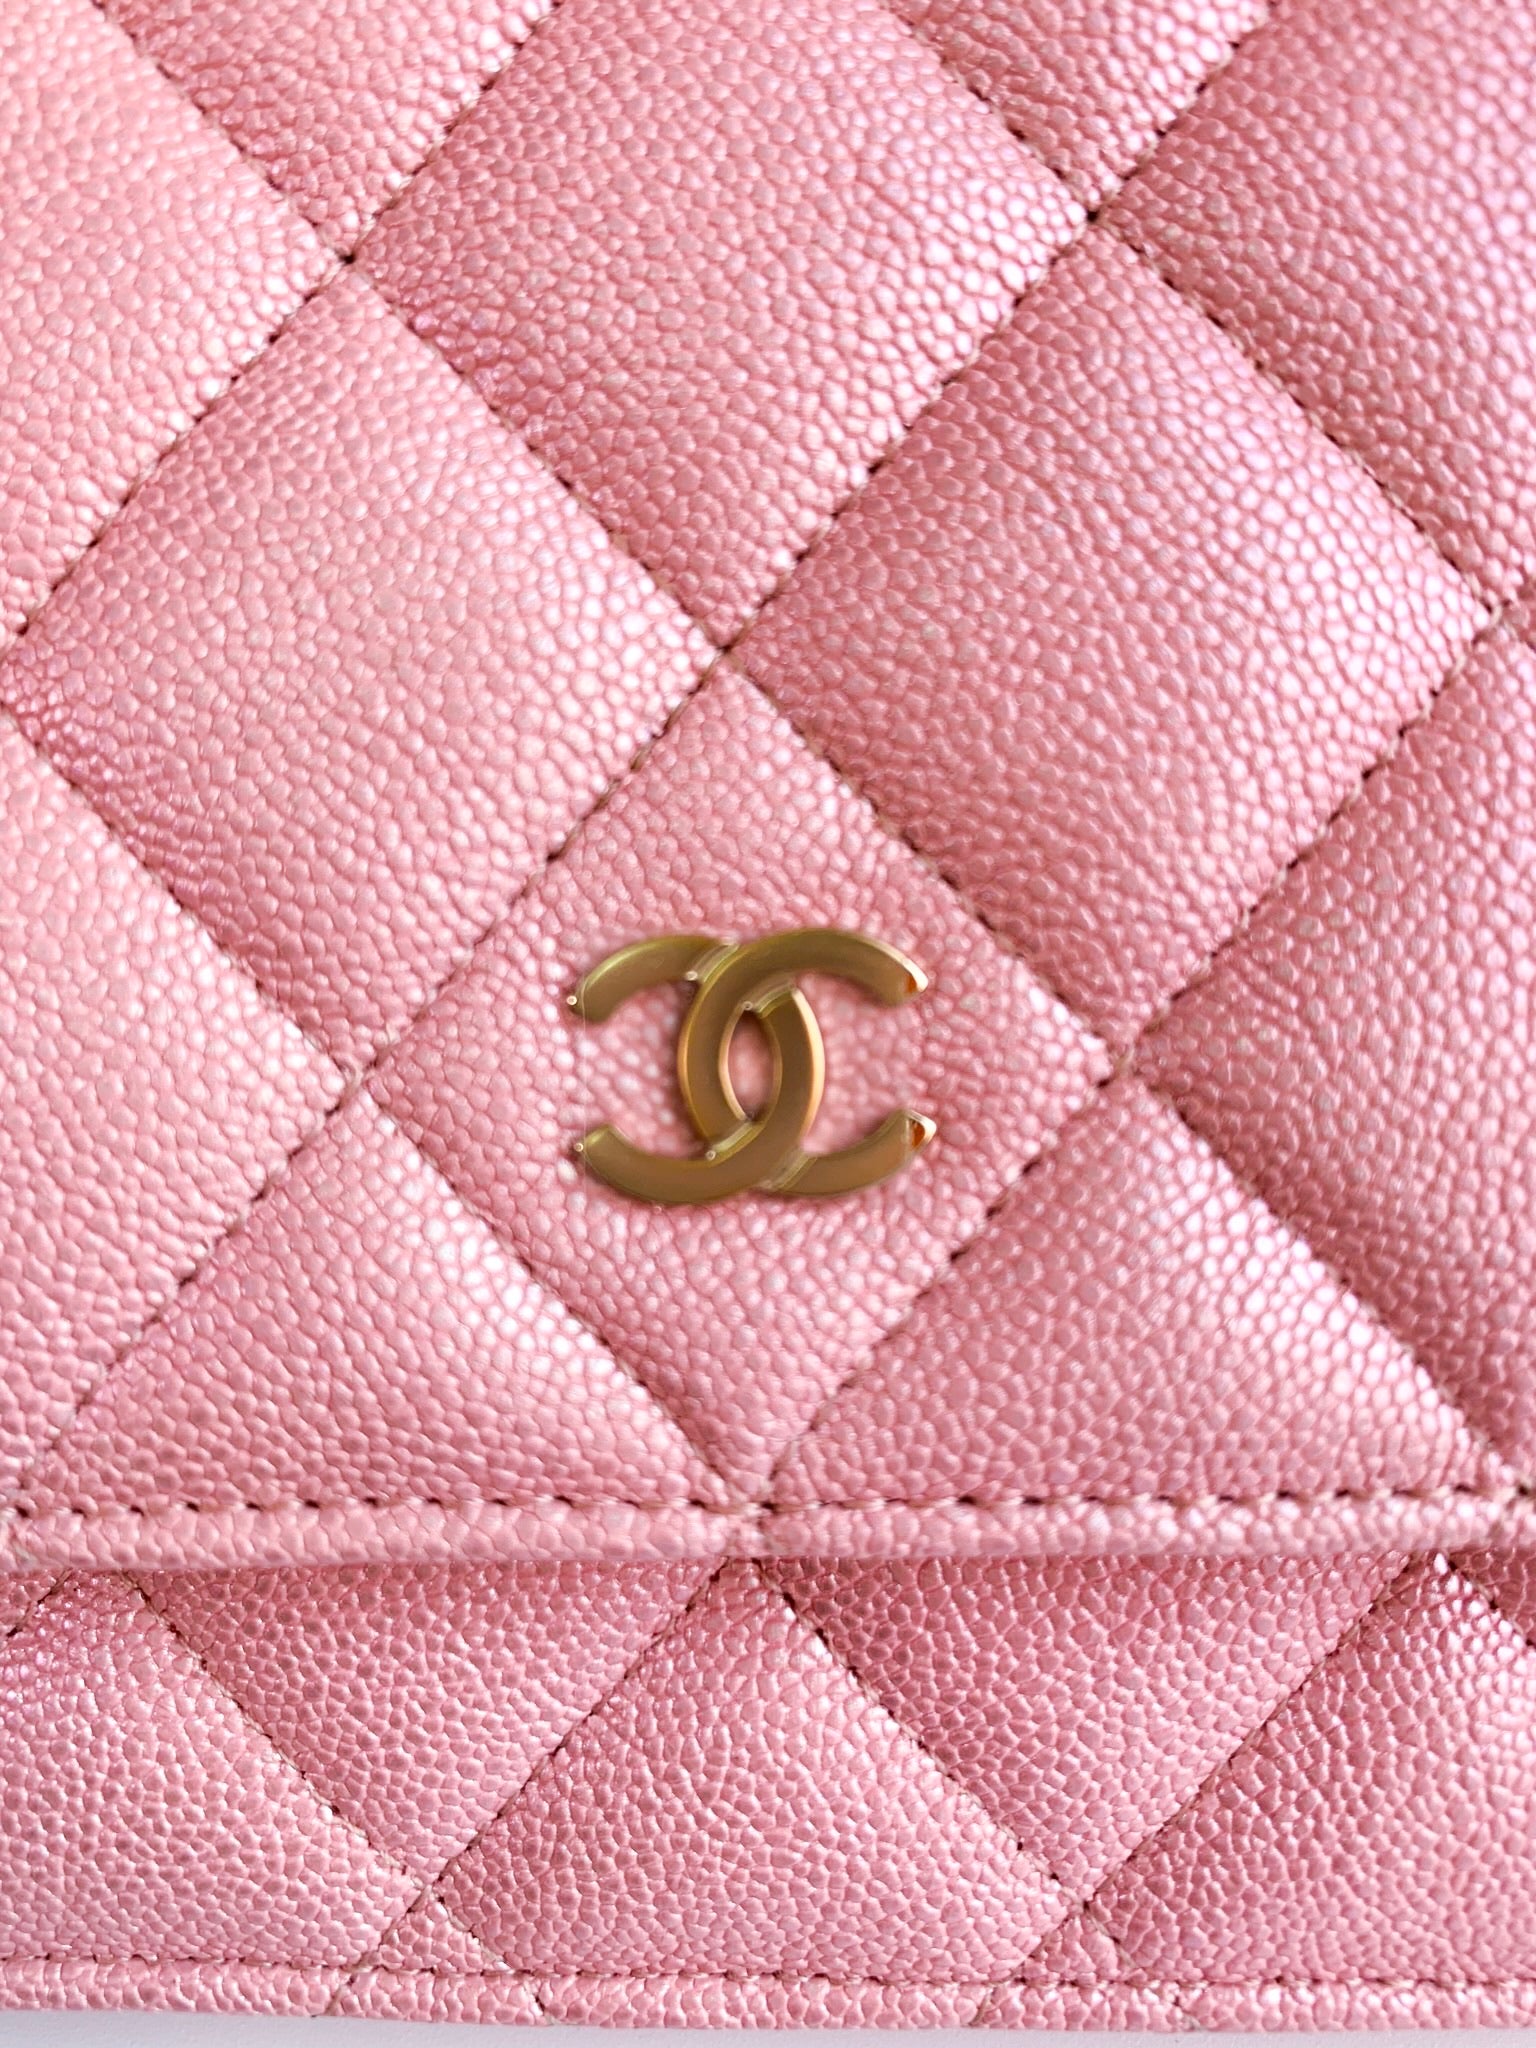 Chanel Iridescent Caviar Quilted Wallet on Chain WOC Pink Light